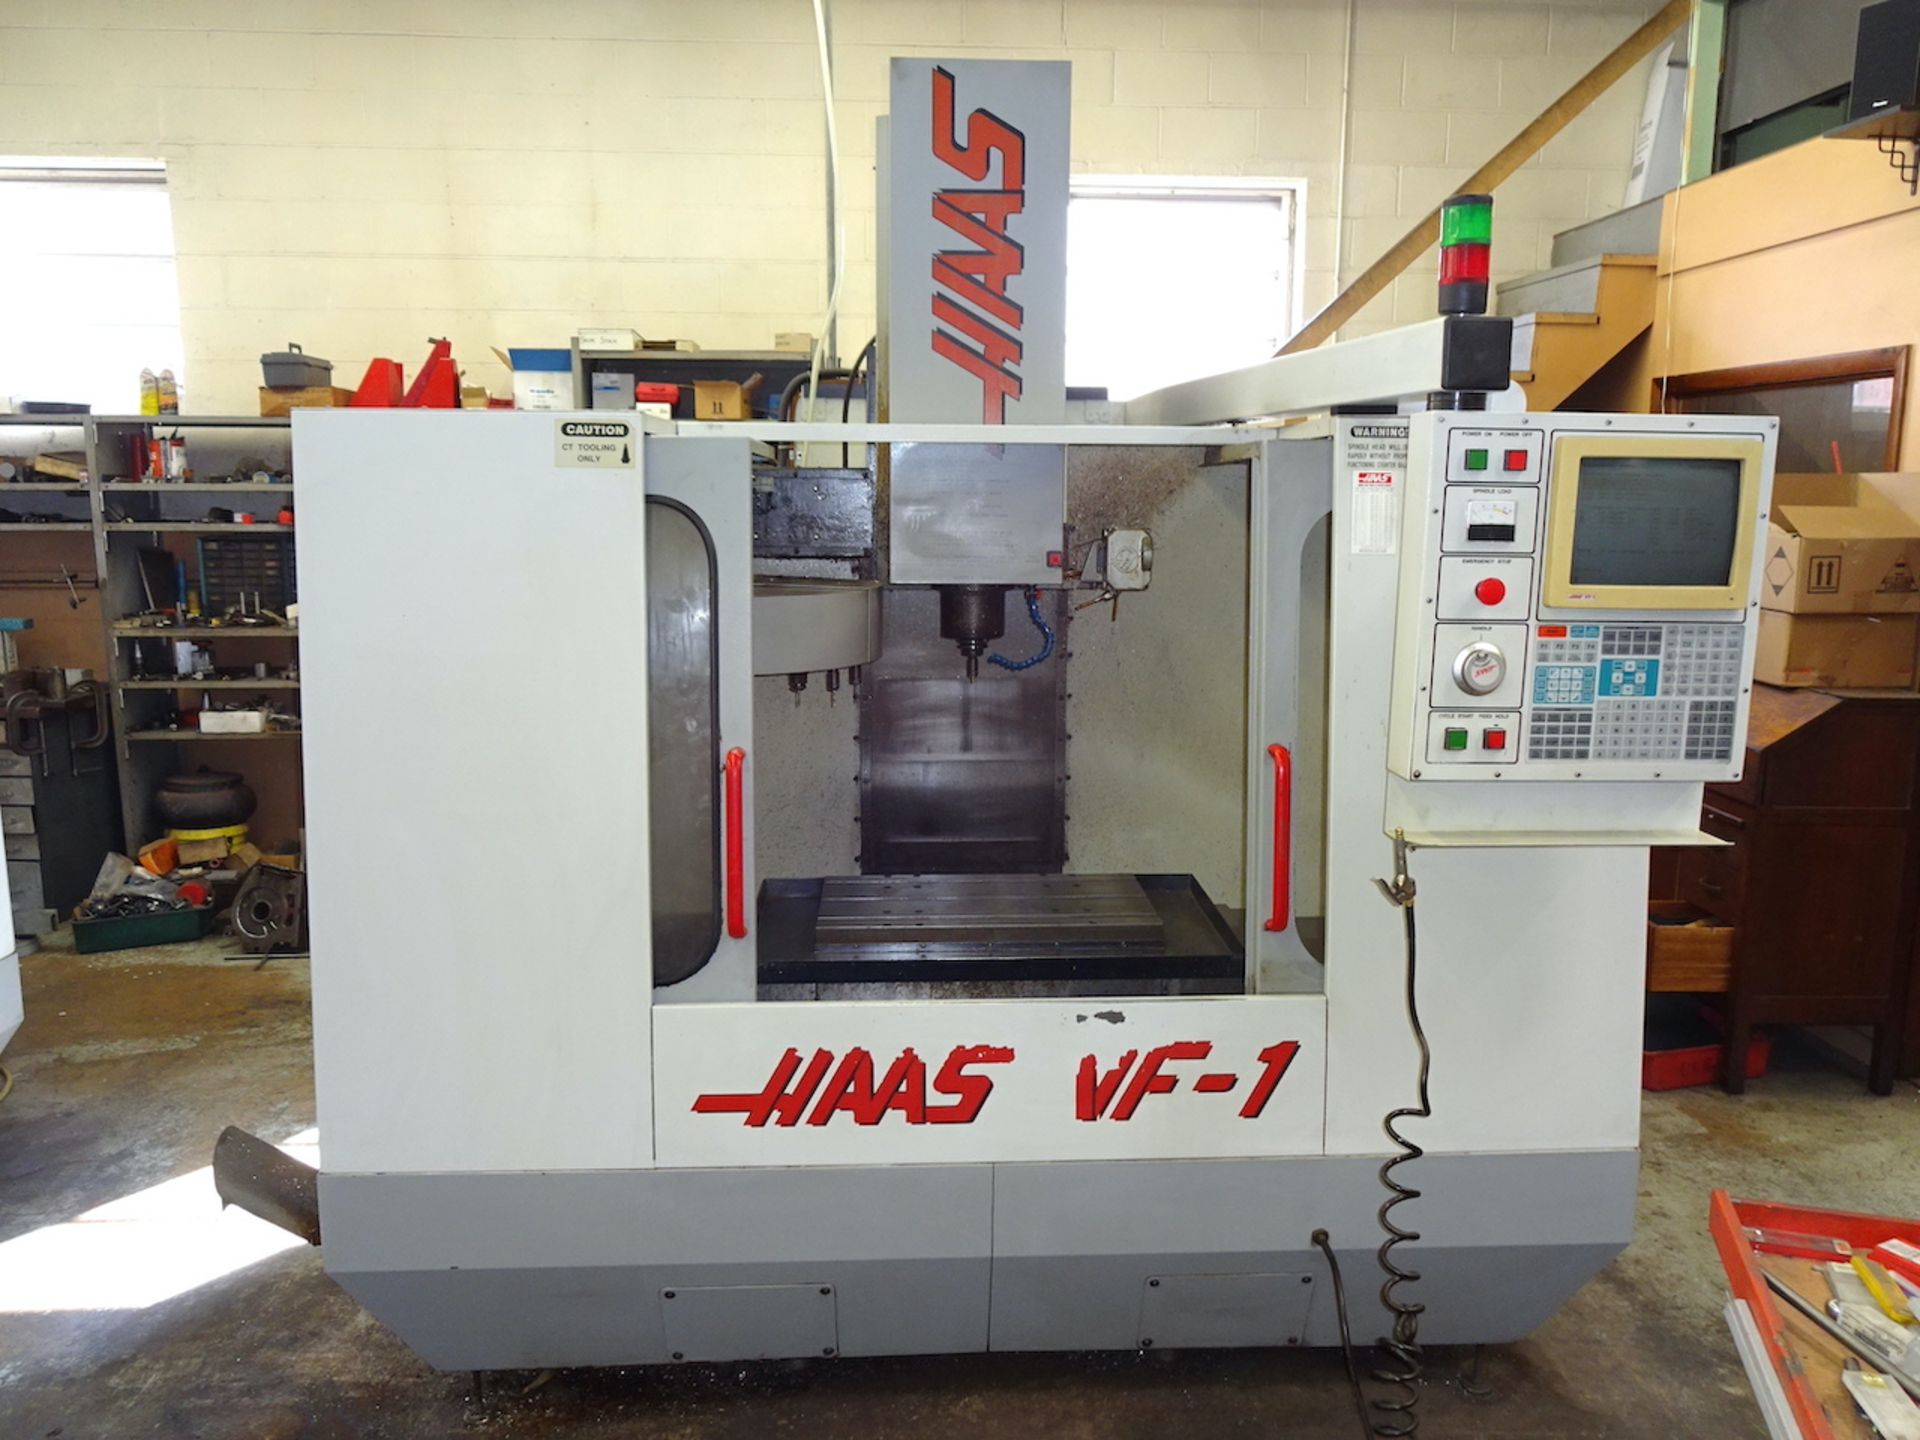 1995 Haas Model VF-1 CNC Vertical Machining Center, S/N 6007, Coolant System, 20 Station Automatic - Image 2 of 11